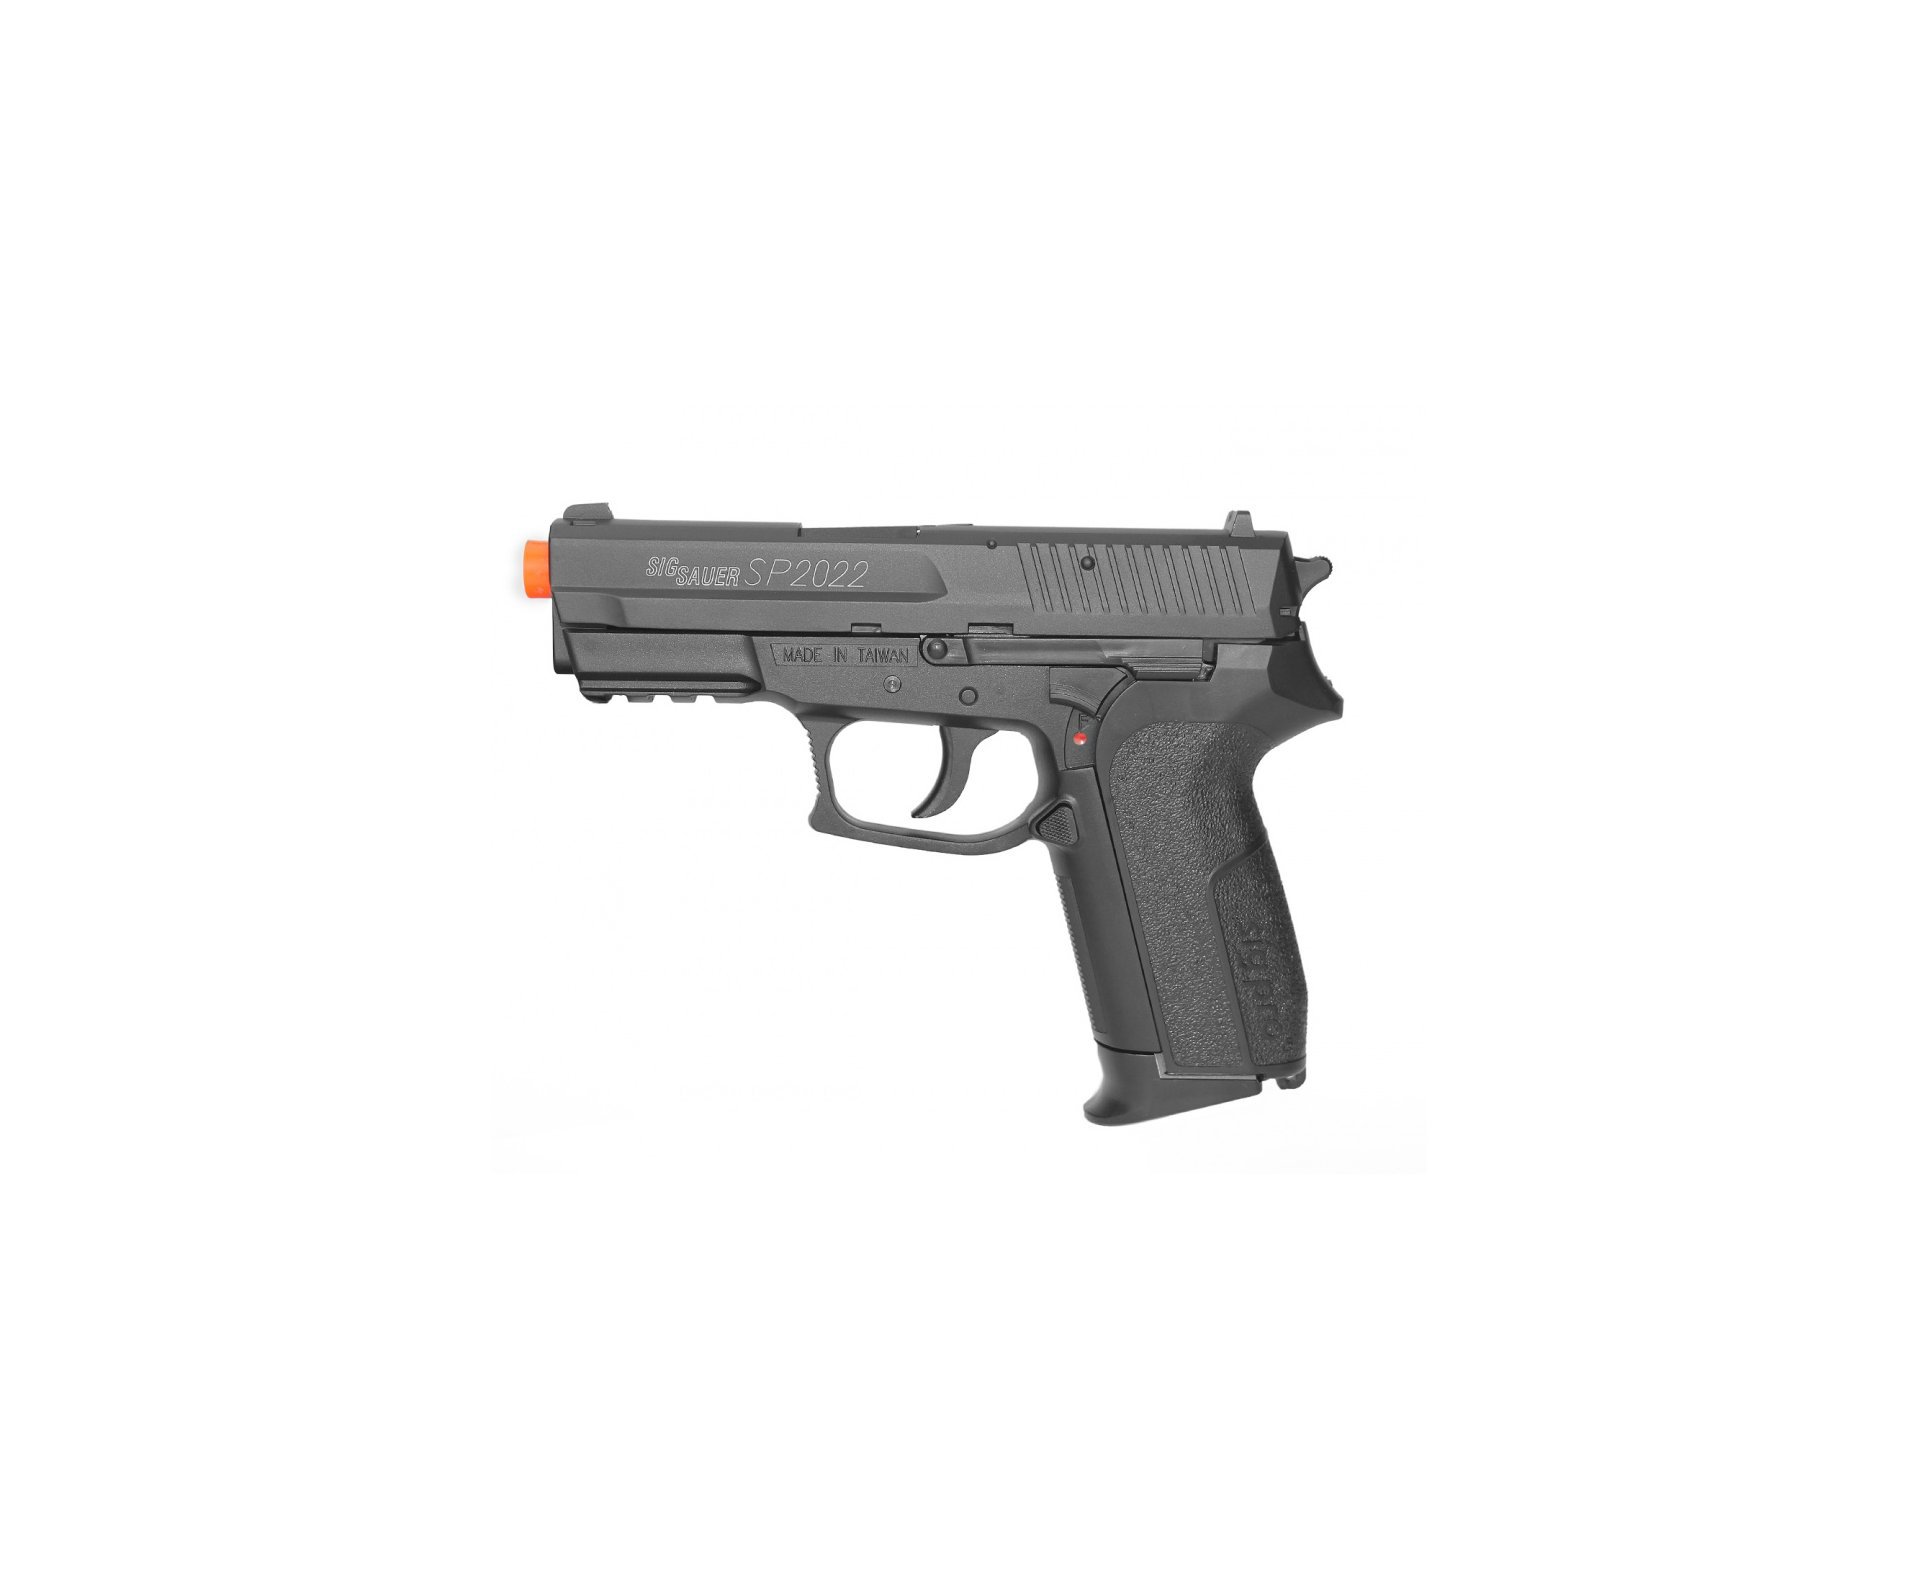 Pistola Airsoft Gas Co2 Sig Sauer Sp2022 Slide Metal Cal 6.0mm + Case + Bbs + 2 Cilindro Co2